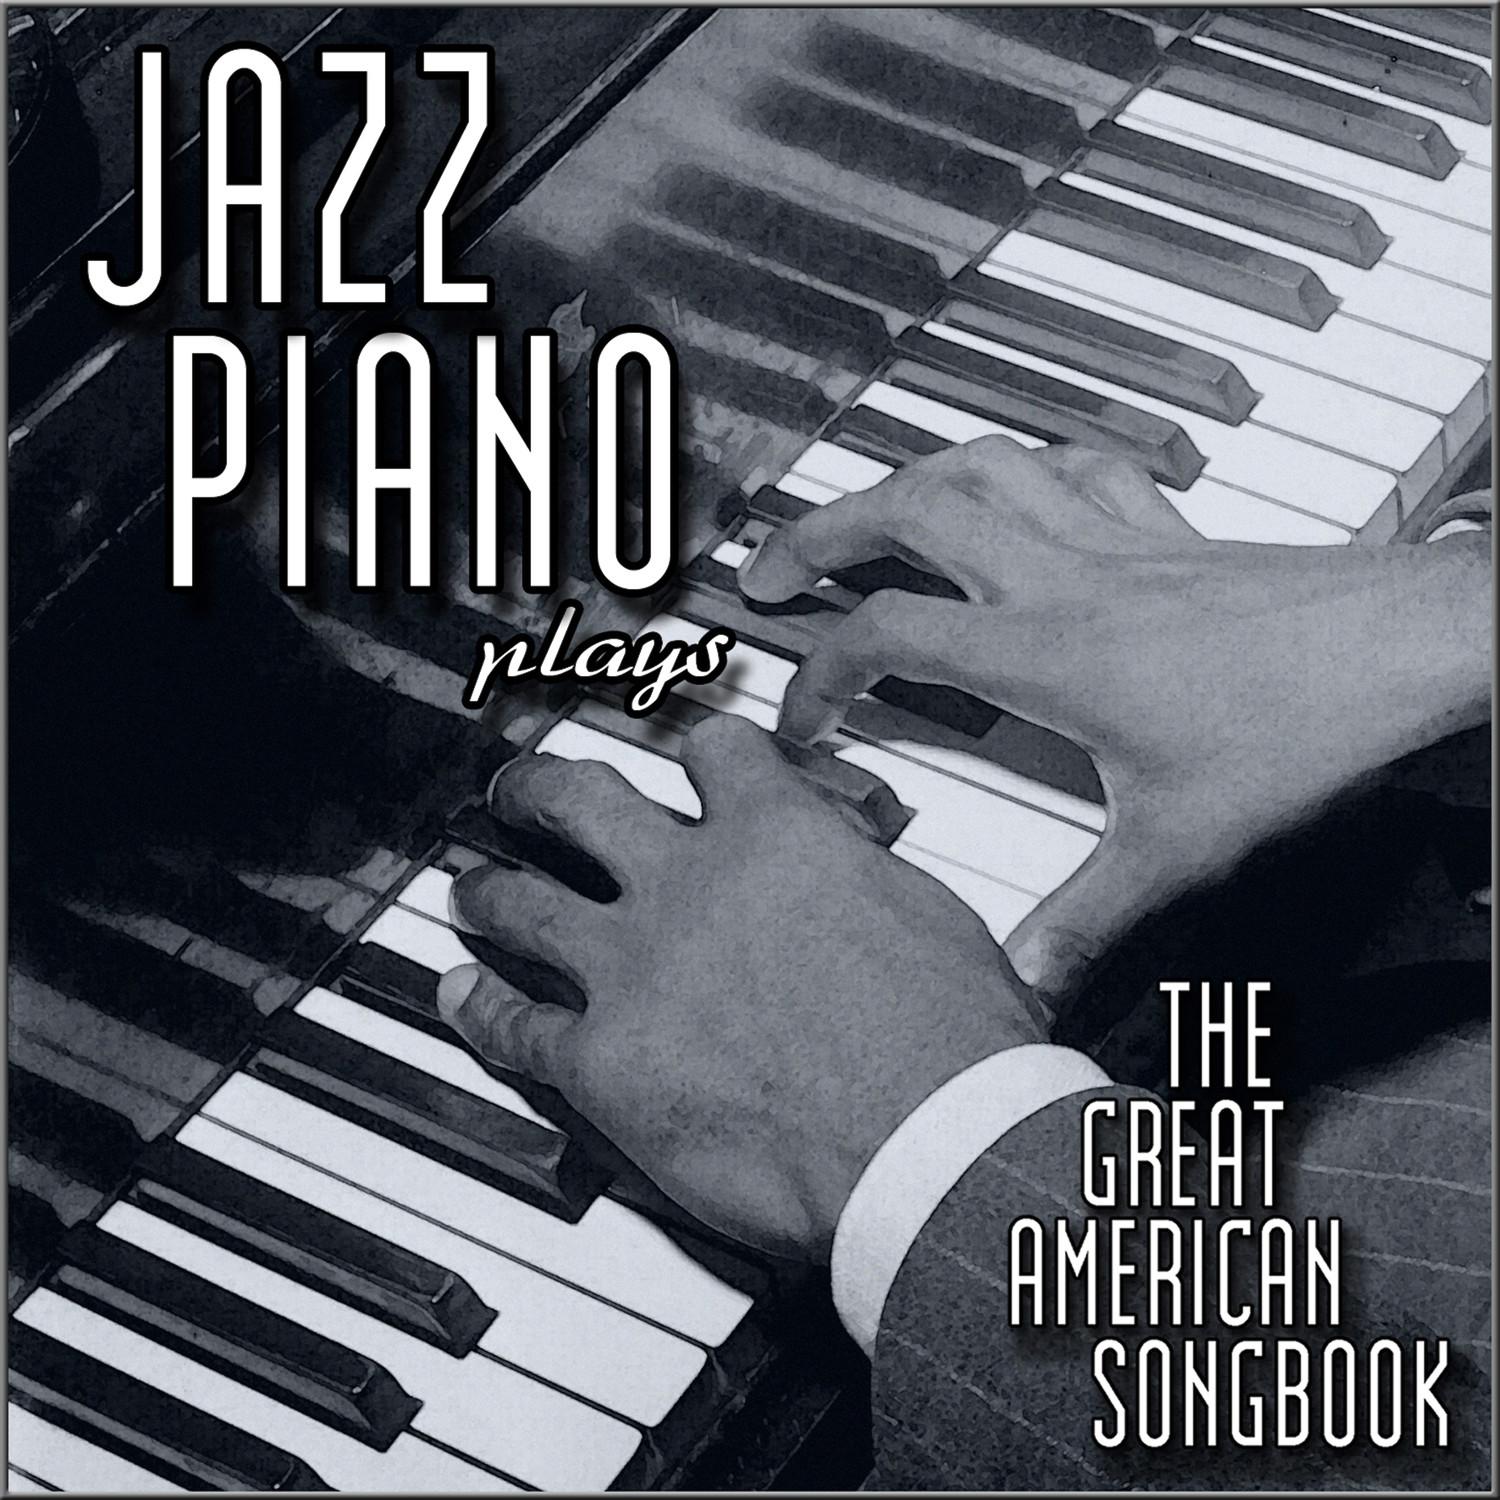 Jazz Piano Plays the Great American Songbook